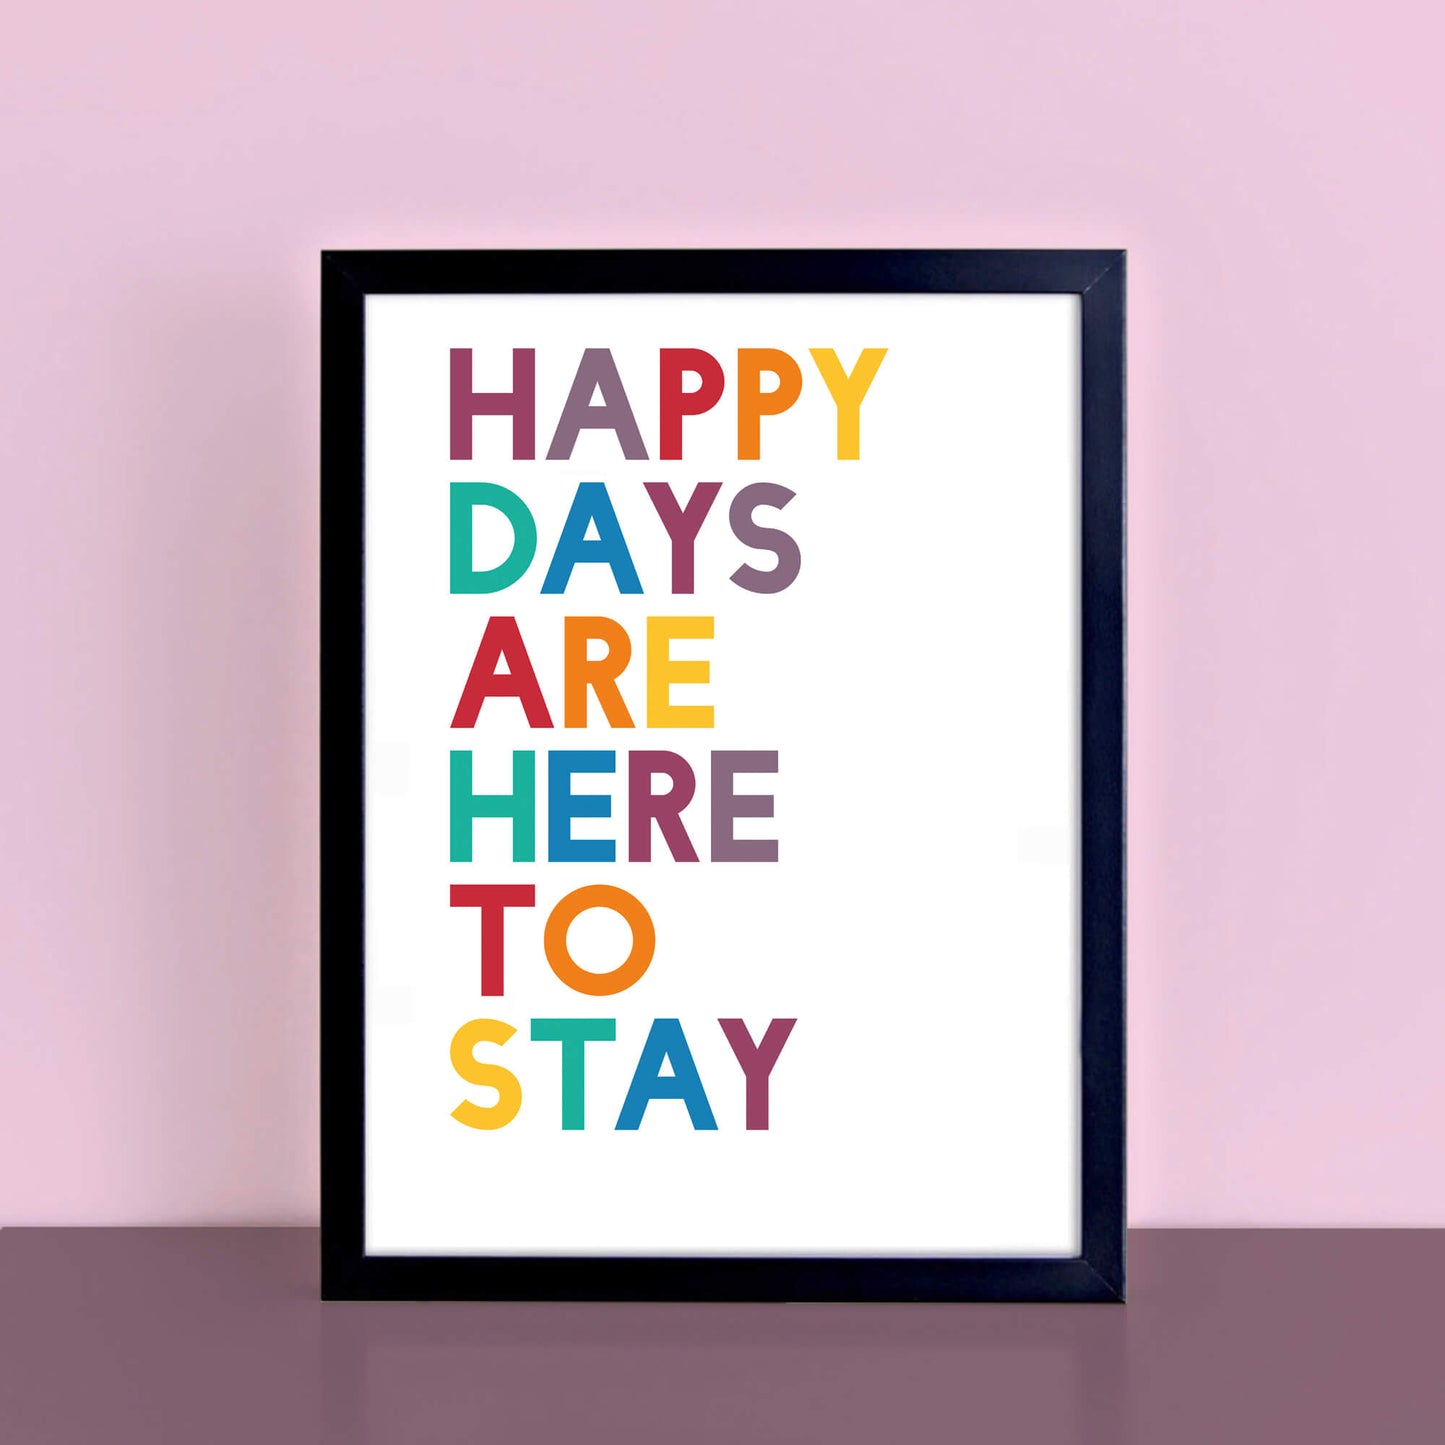 Happy Days Are Here To Stay Print by SixElevenCreations. Product Code SEP0213